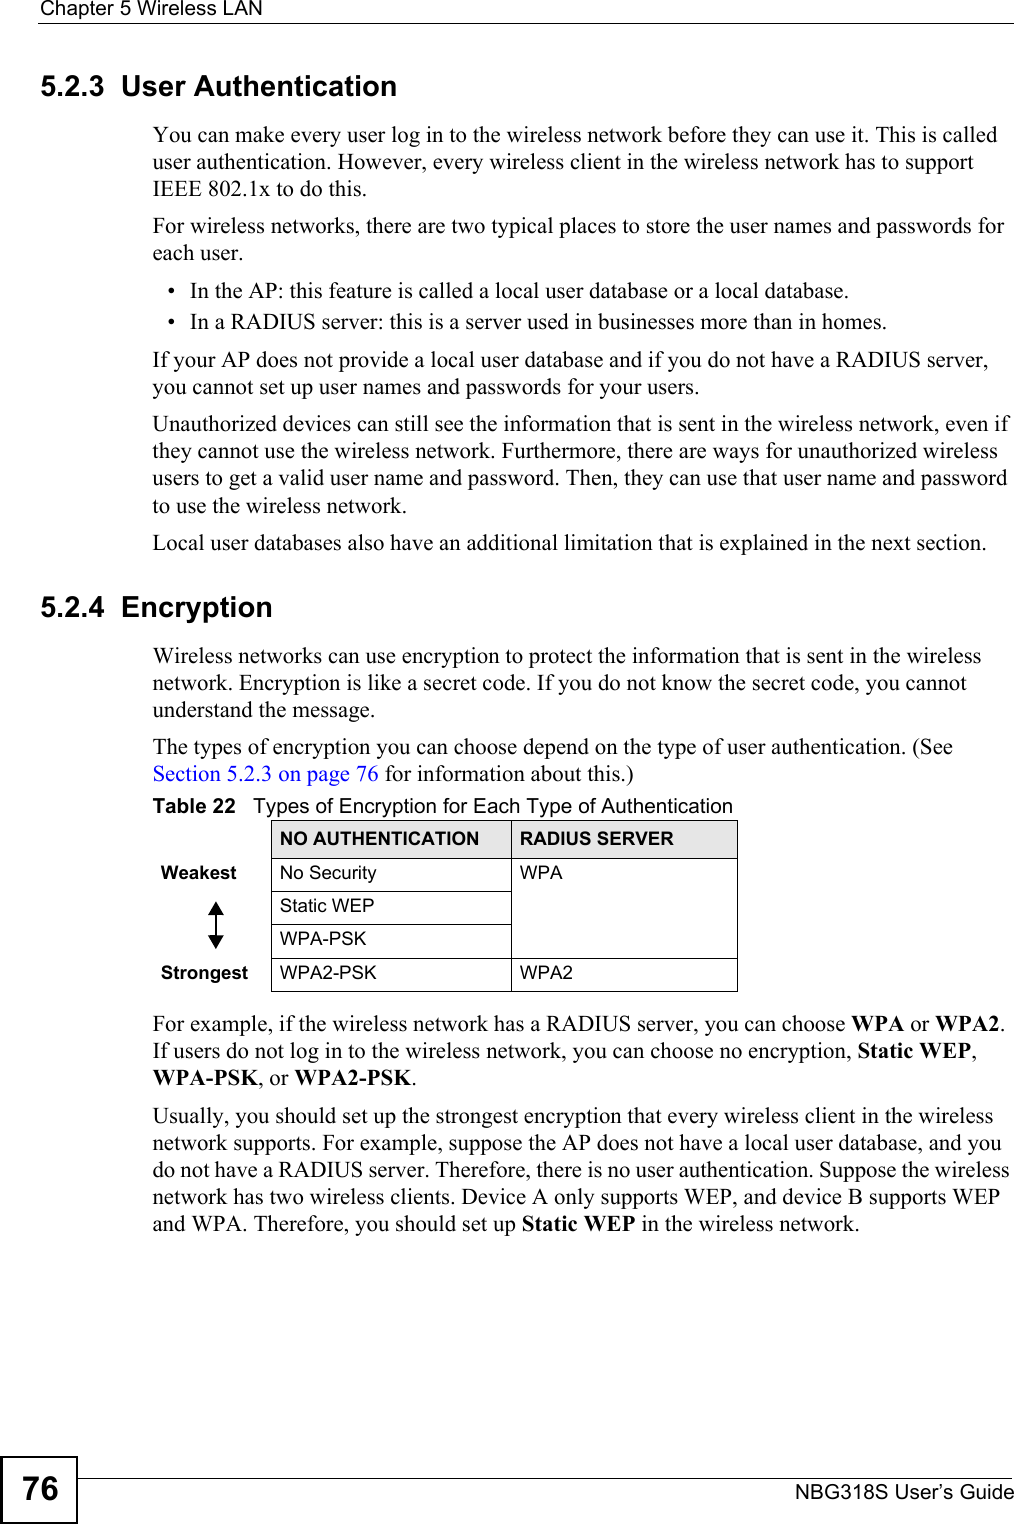 Chapter 5 Wireless LANNBG318S User’s Guide765.2.3  User AuthenticationYou can make every user log in to the wireless network before they can use it. This is called user authentication. However, every wireless client in the wireless network has to support IEEE 802.1x to do this.For wireless networks, there are two typical places to store the user names and passwords for each user.• In the AP: this feature is called a local user database or a local database.• In a RADIUS server: this is a server used in businesses more than in homes.If your AP does not provide a local user database and if you do not have a RADIUS server, you cannot set up user names and passwords for your users.Unauthorized devices can still see the information that is sent in the wireless network, even if they cannot use the wireless network. Furthermore, there are ways for unauthorized wireless users to get a valid user name and password. Then, they can use that user name and password to use the wireless network.Local user databases also have an additional limitation that is explained in the next section.5.2.4  EncryptionWireless networks can use encryption to protect the information that is sent in the wireless network. Encryption is like a secret code. If you do not know the secret code, you cannot understand the message.The types of encryption you can choose depend on the type of user authentication. (See Section 5.2.3 on page 76 for information about this.)For example, if the wireless network has a RADIUS server, you can choose WPA or WPA2. If users do not log in to the wireless network, you can choose no encryption, Static WEP, WPA-PSK, or WPA2-PSK.Usually, you should set up the strongest encryption that every wireless client in the wireless network supports. For example, suppose the AP does not have a local user database, and you do not have a RADIUS server. Therefore, there is no user authentication. Suppose the wireless network has two wireless clients. Device A only supports WEP, and device B supports WEP and WPA. Therefore, you should set up Static WEP in the wireless network.Table 22   Types of Encryption for Each Type of AuthenticationNO AUTHENTICATION RADIUS SERVERWeakest No Security WPAStatic WEPWPA-PSKStrongest WPA2-PSK WPA2